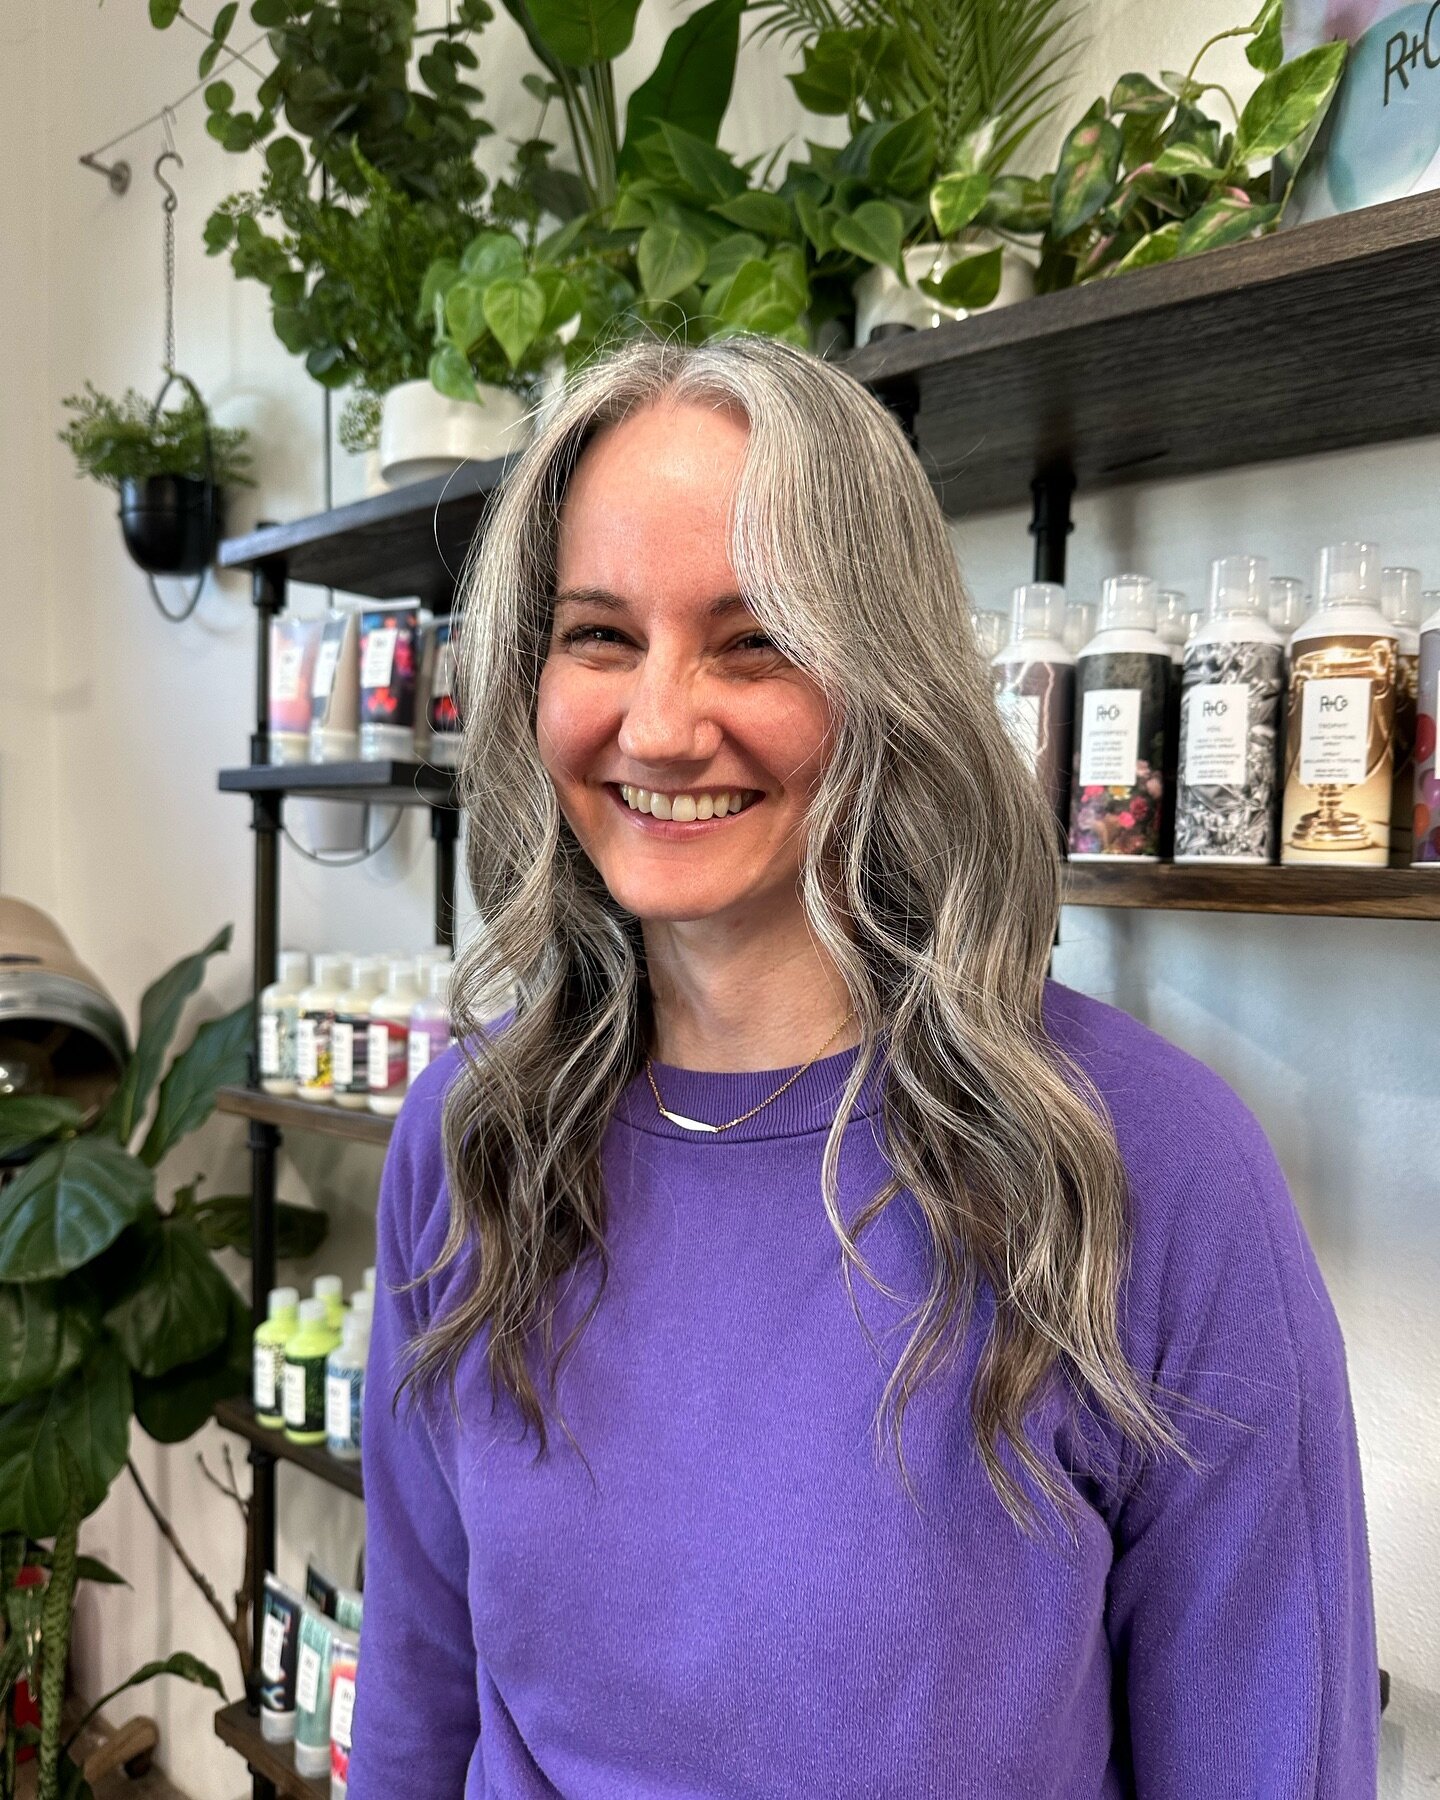 Many of my clients have began embracing their wisdom hair &amp; I absolutely love it 💕 
&bull;

&bull;

&bull;
#wisdomhair #naturalgrayhair #naturalwhitehair #naturalsilverhair #silverhairtransition #whitehairs #culvercityhairstylist #culvercityhair